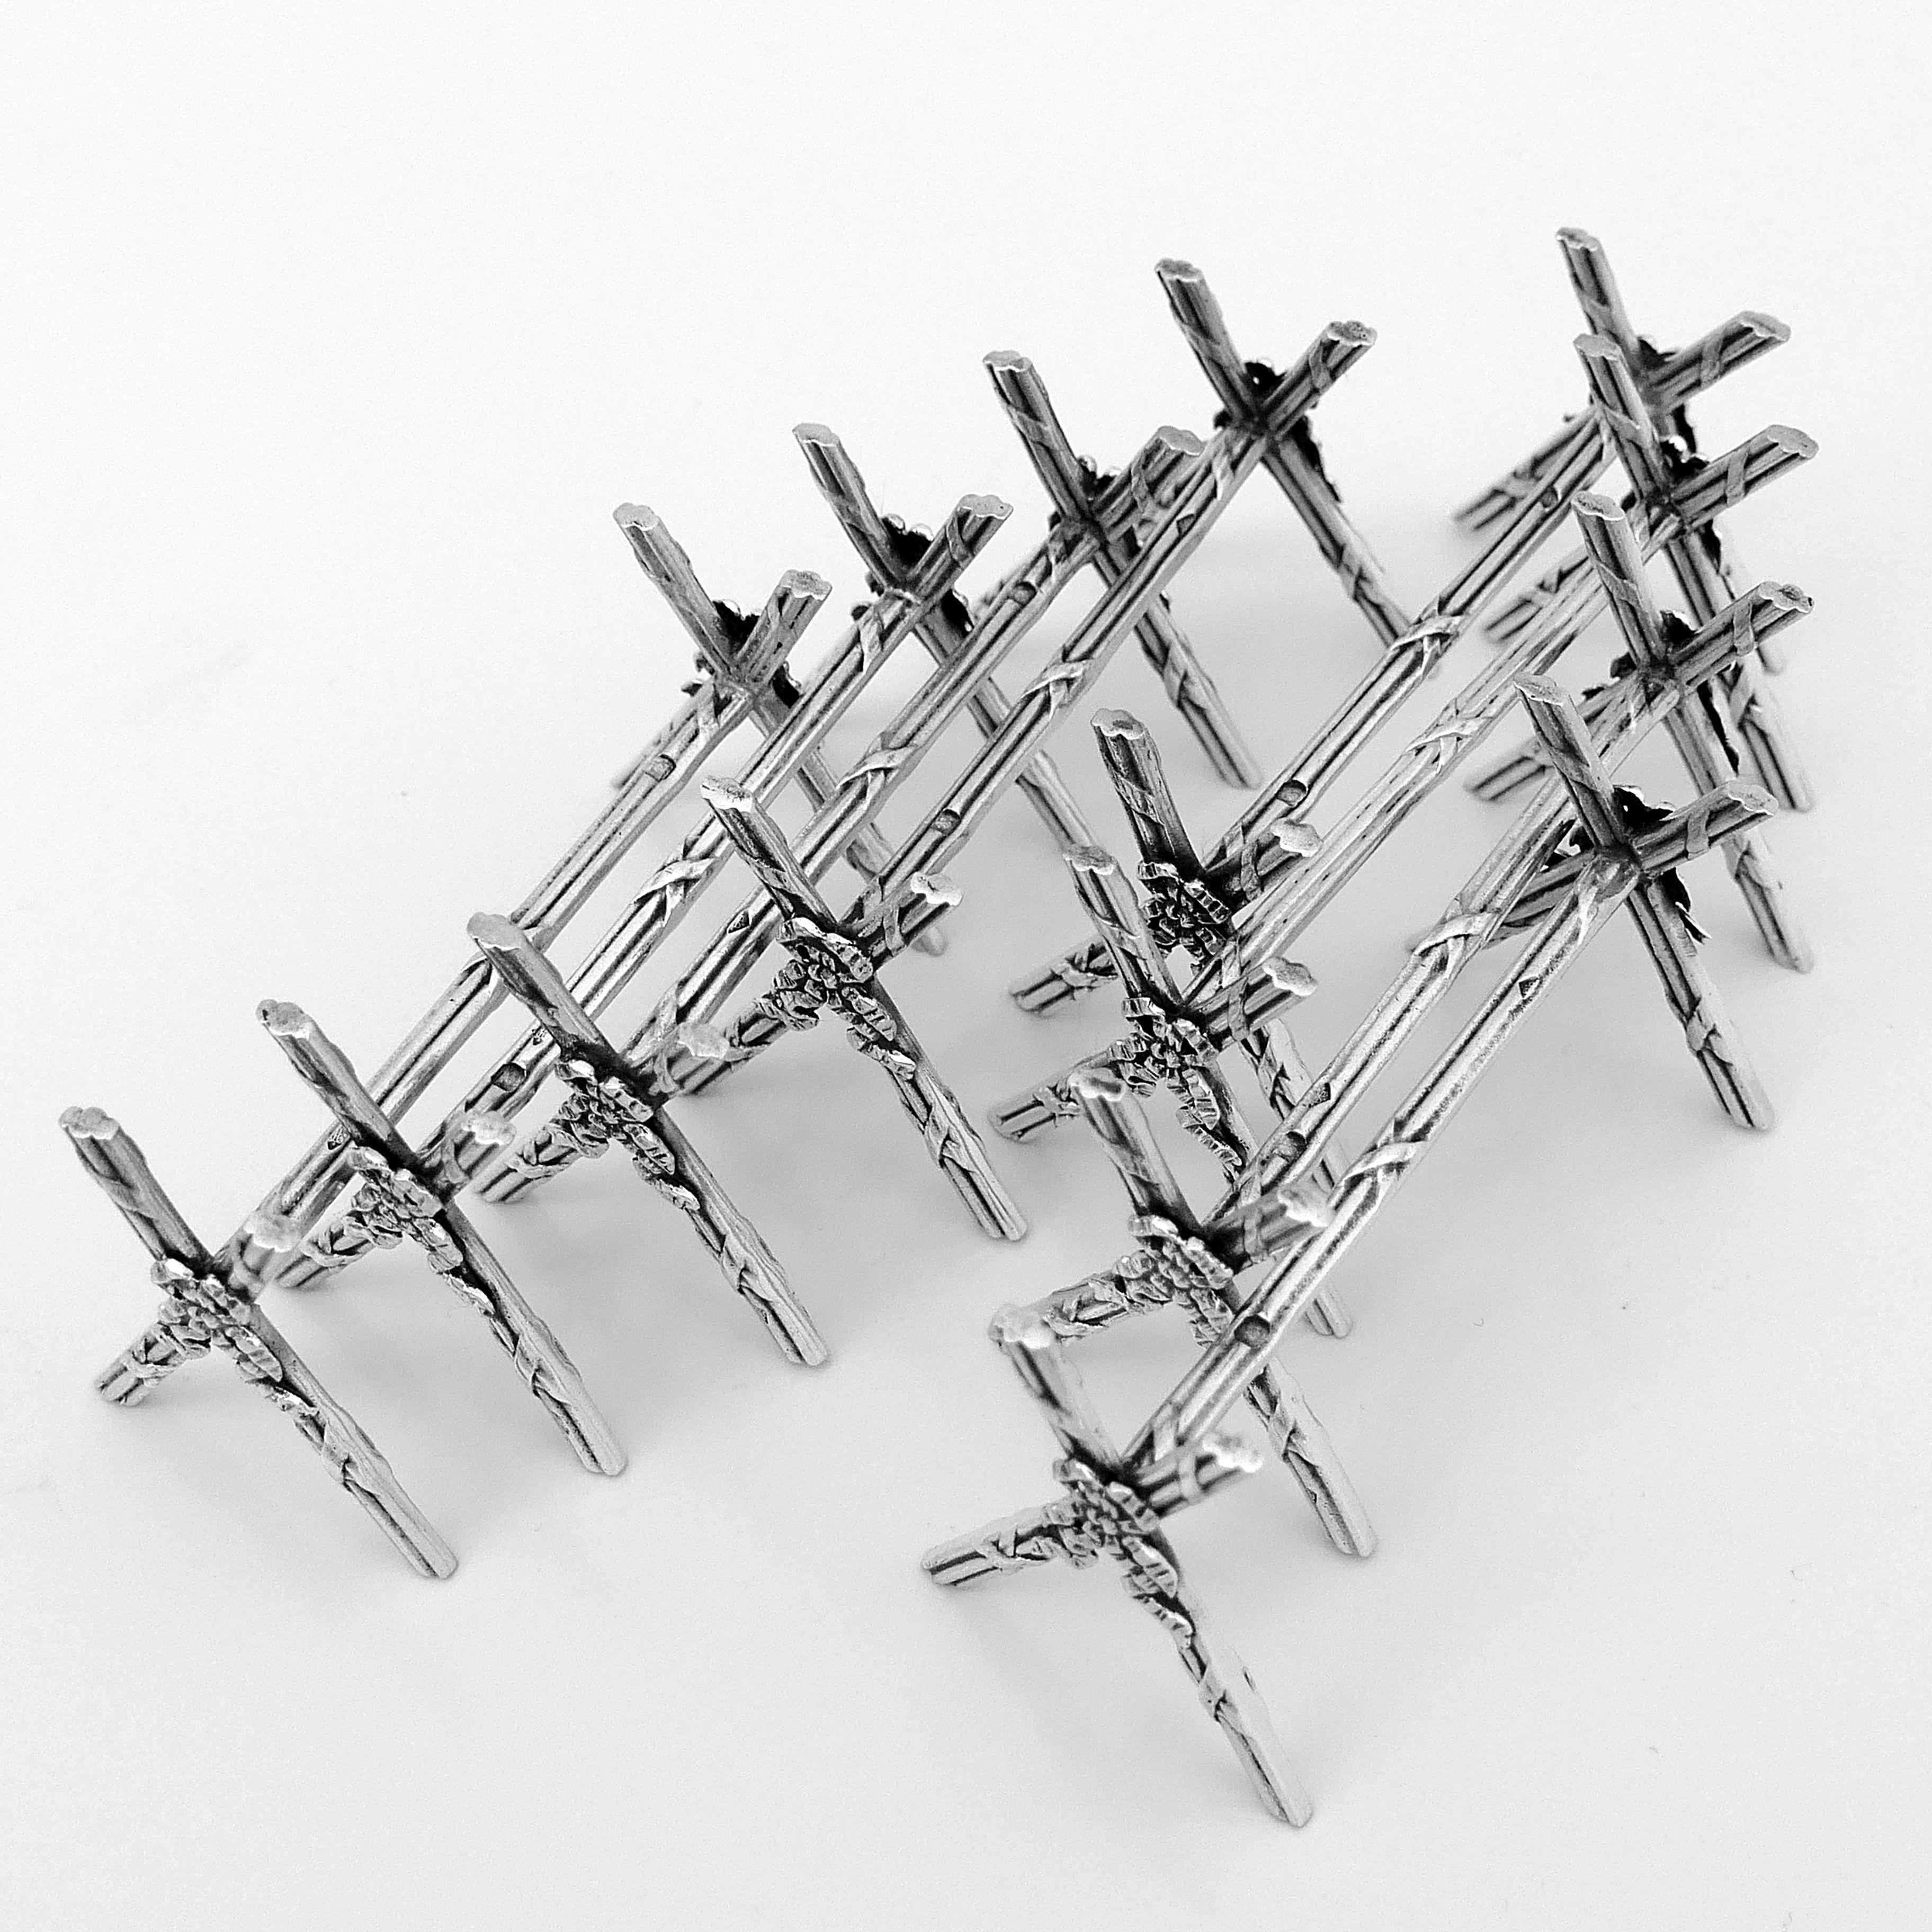 Rare French All Sterling Silver Knife Rests Set of 8-Piece, Ribbon im Zustand „Gut“ im Angebot in TRIAIZE, PAYS DE LOIRE